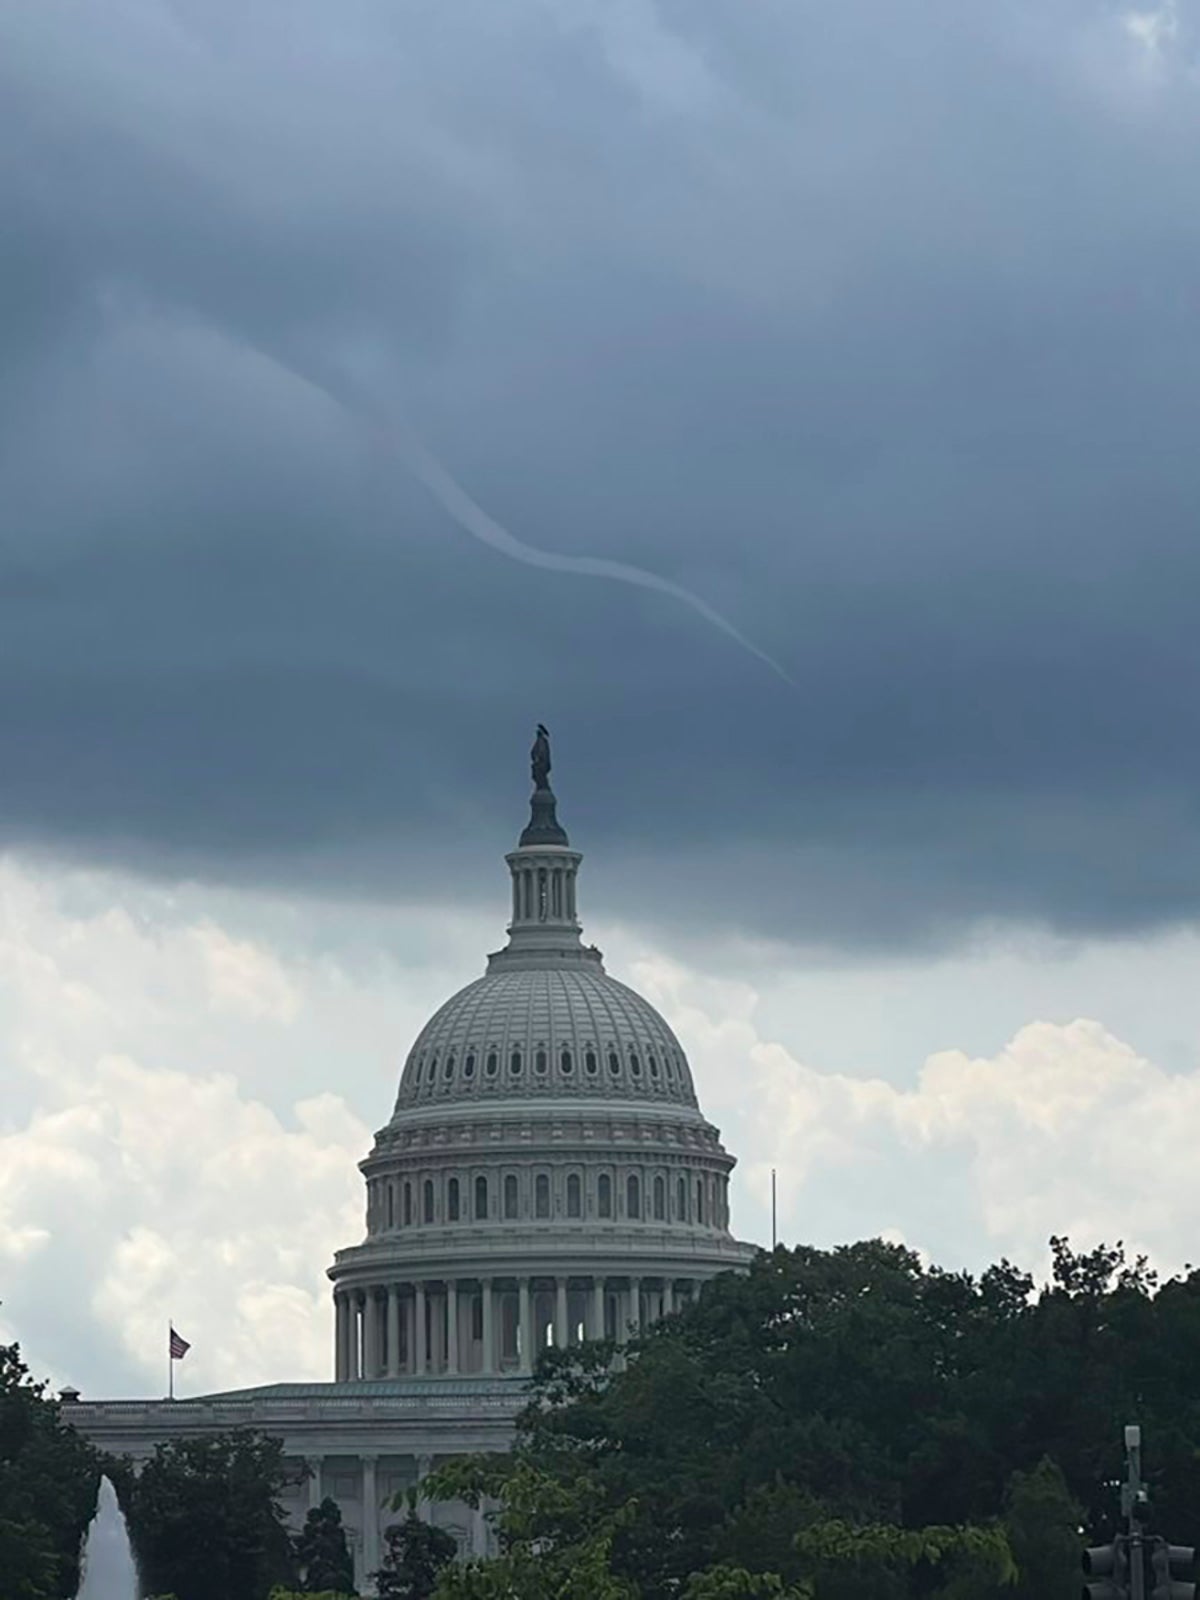 Small funnel cloud over US Capitol turns into viral photo